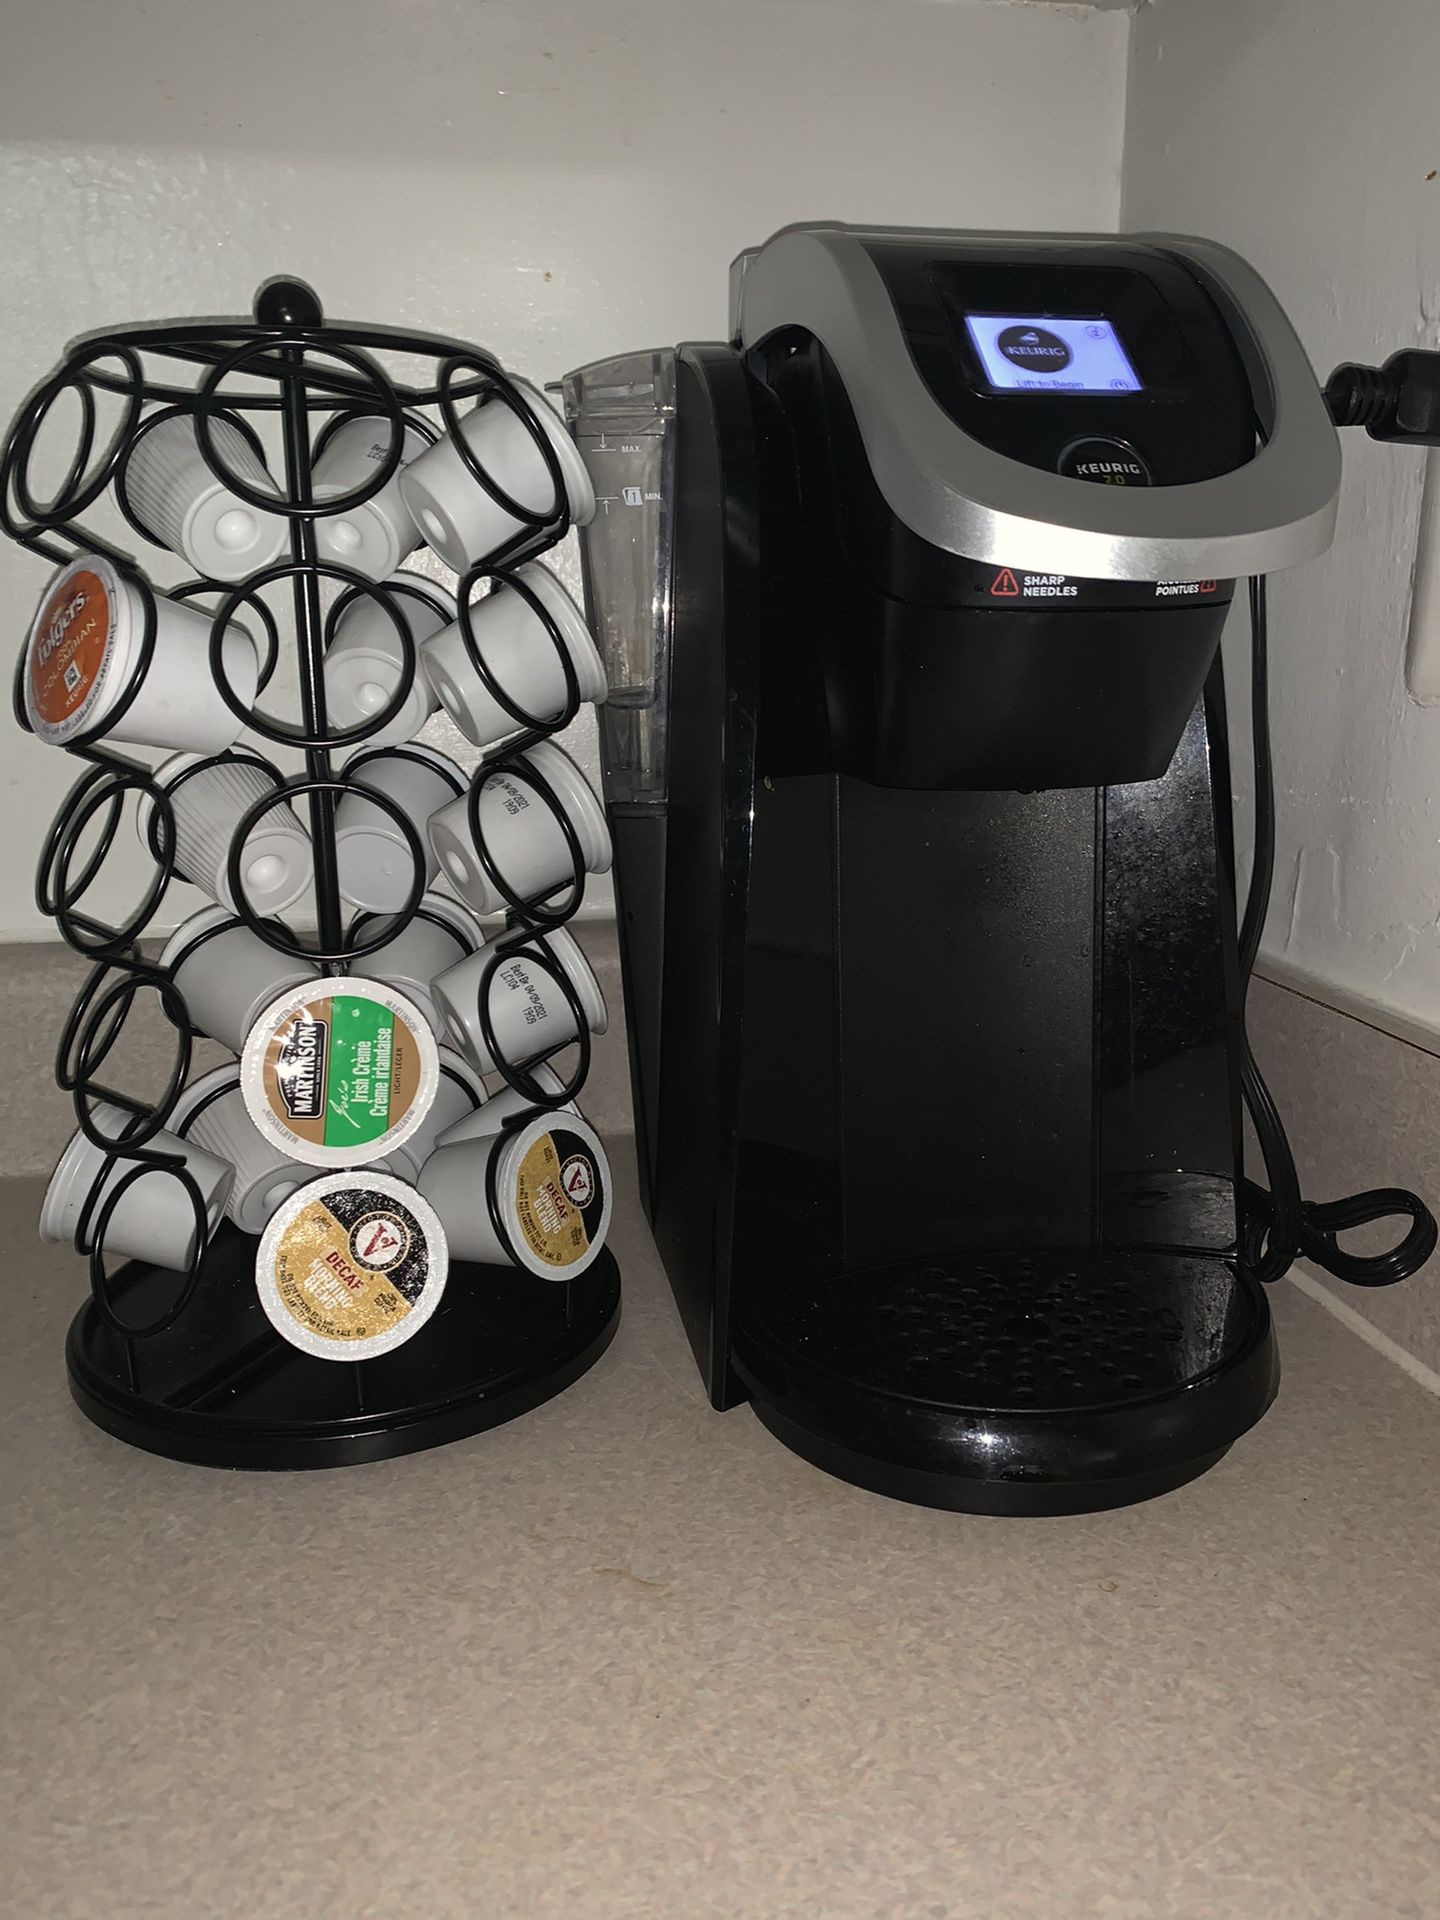 Keurig 2.0 touch screen with kcup holder!